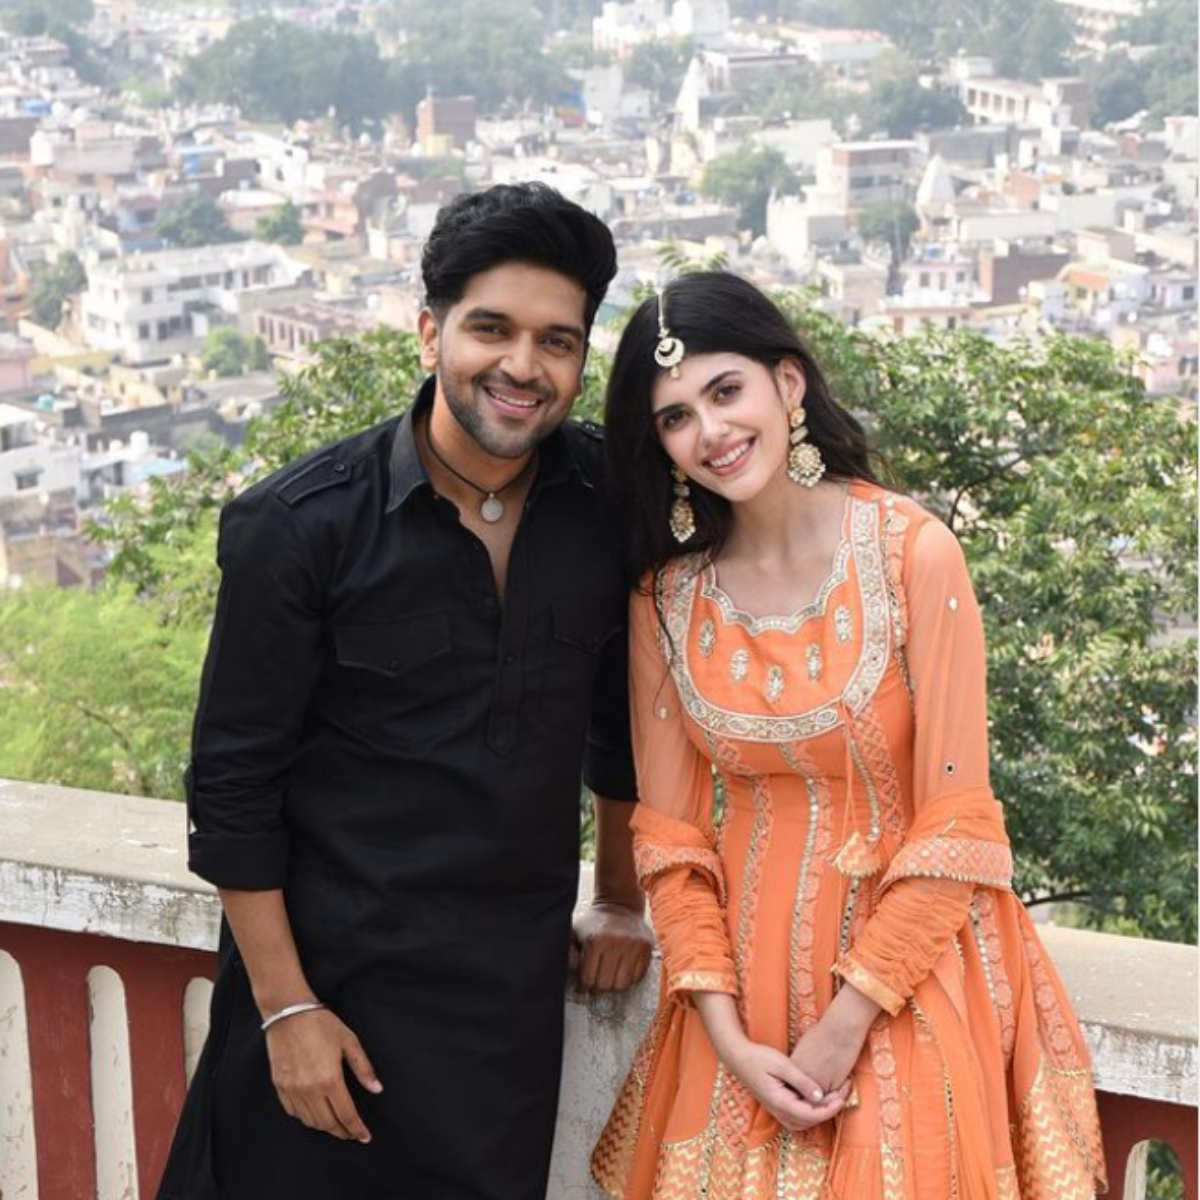 Guru Randhawa REVEALS his mystery girl as Sanjana Sanghi & announces collaboration with her for a music video